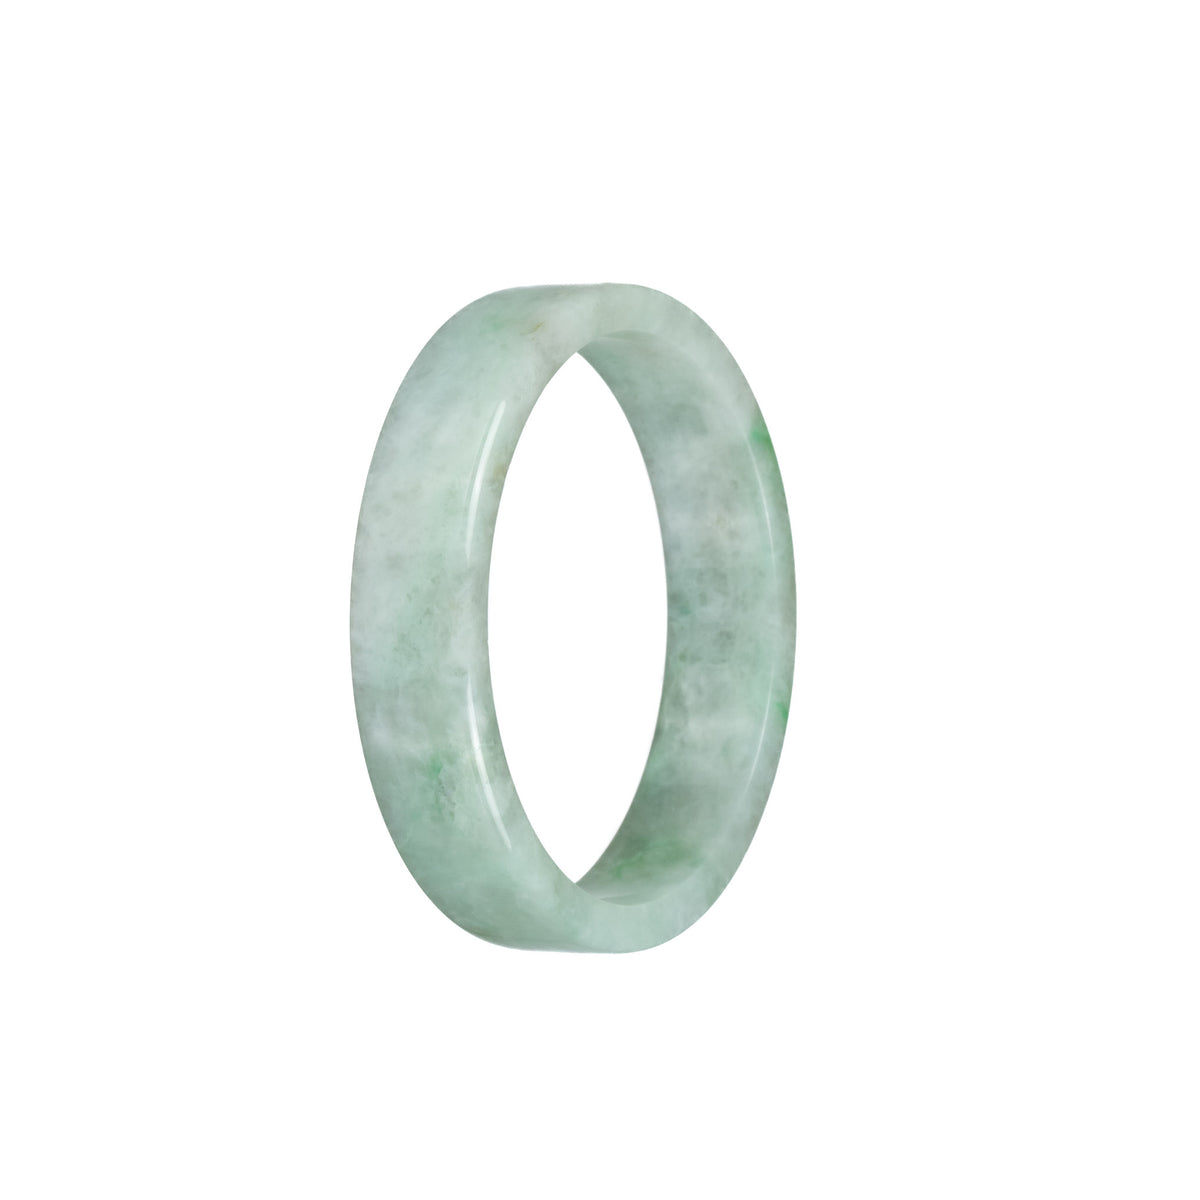 Real Untreated Pale Green with Green Pattern Jade Bangle Bracelet - 52mm Flat